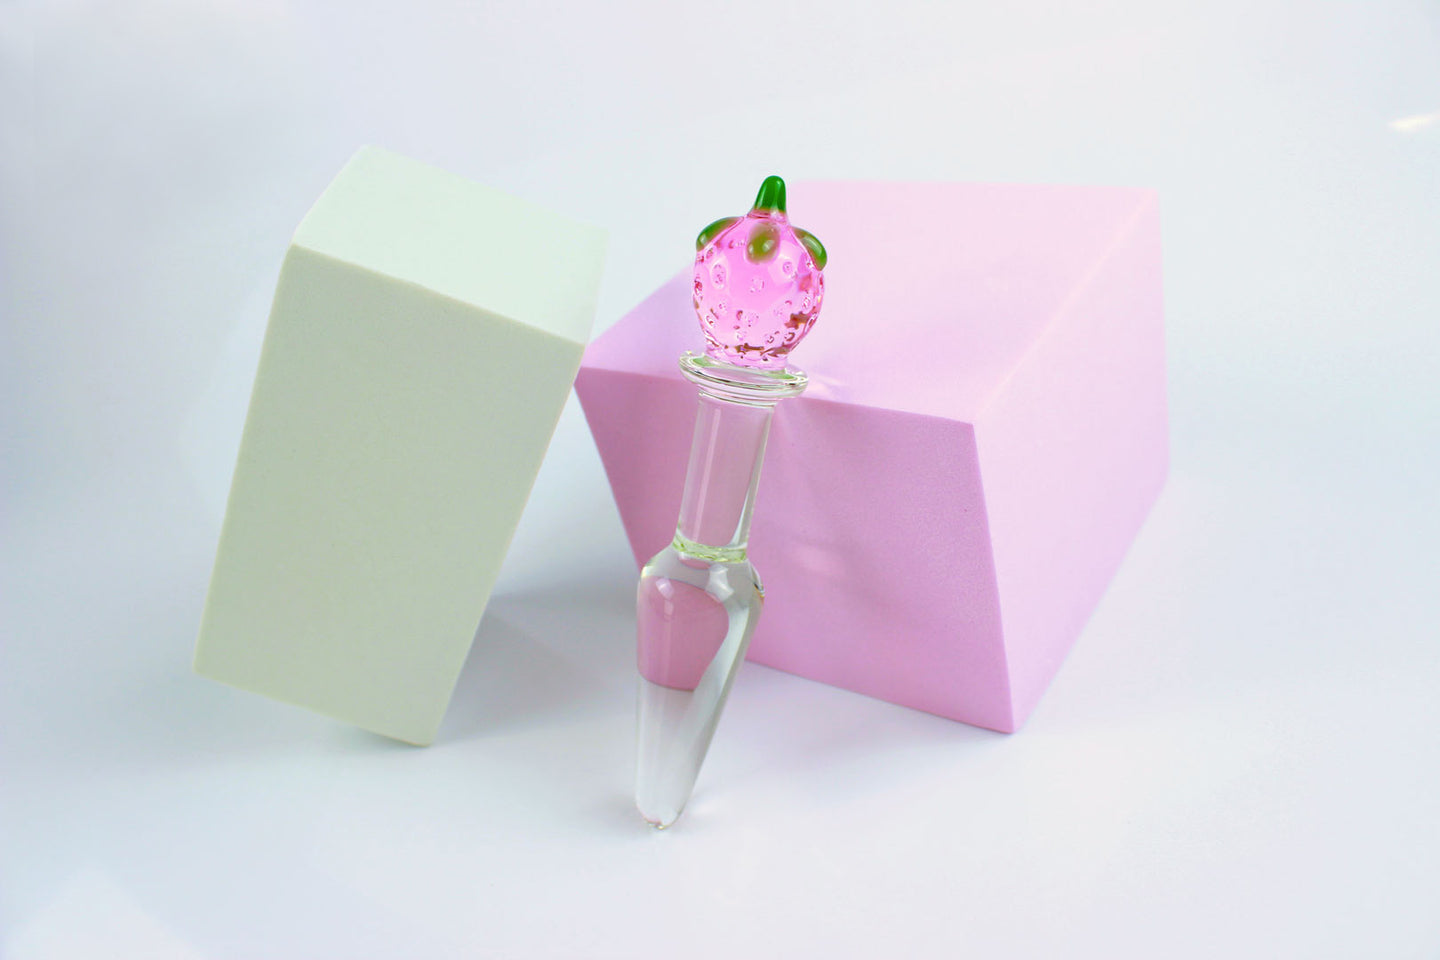 Strawberry tapered glass butt plug against a pink block and white background.